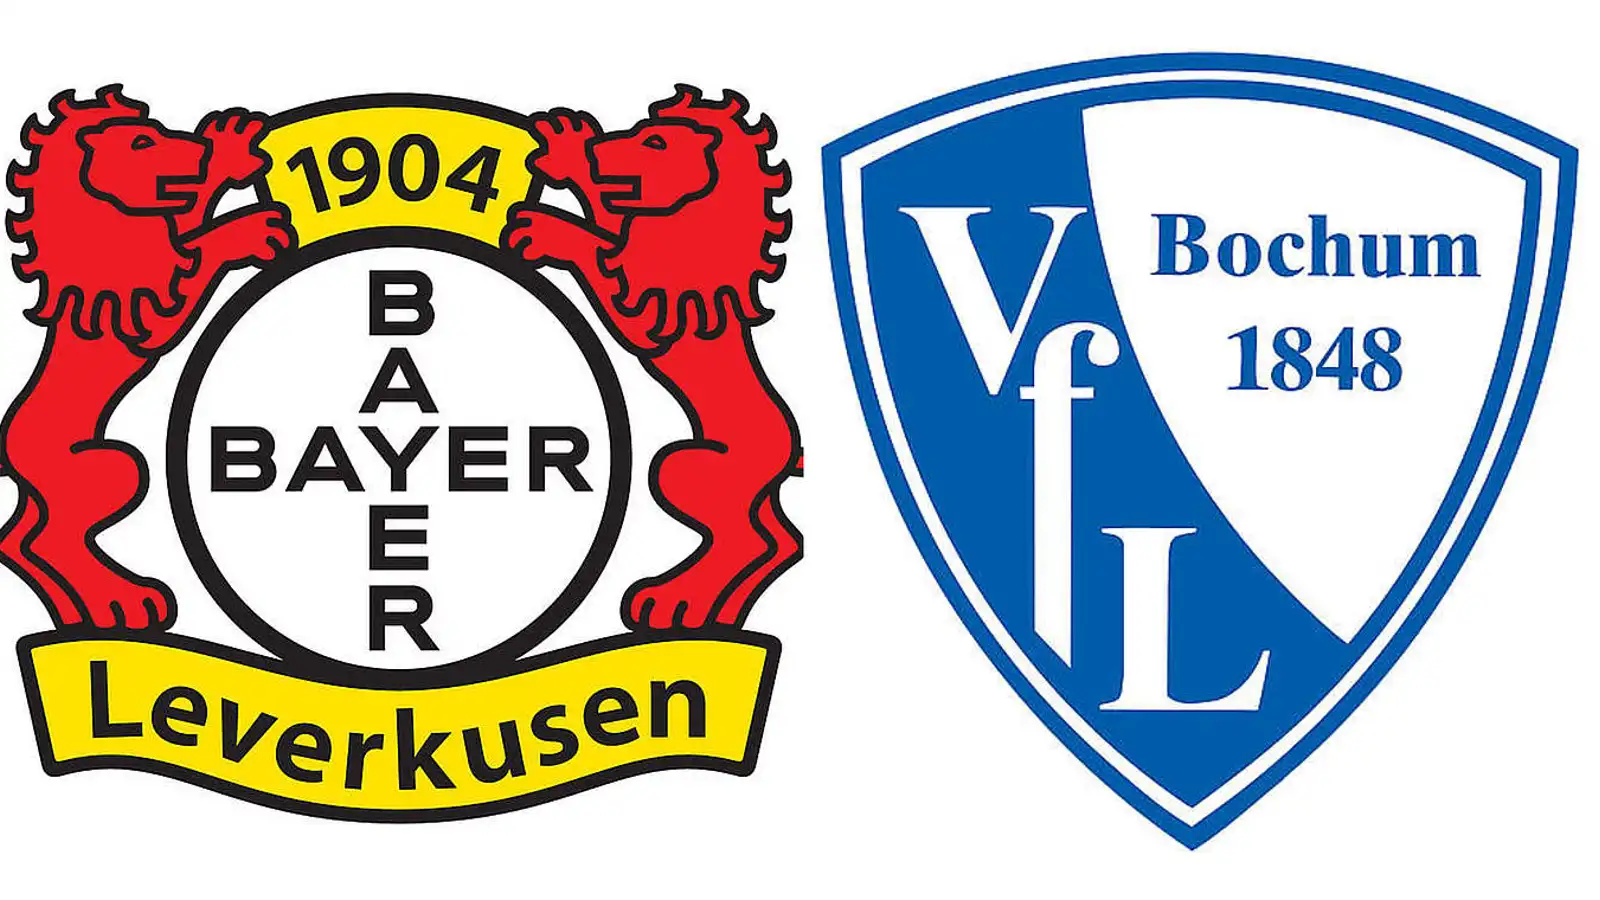 Leverkusen vs Bochum Preview, Team News, and Predicted Lineup and Score